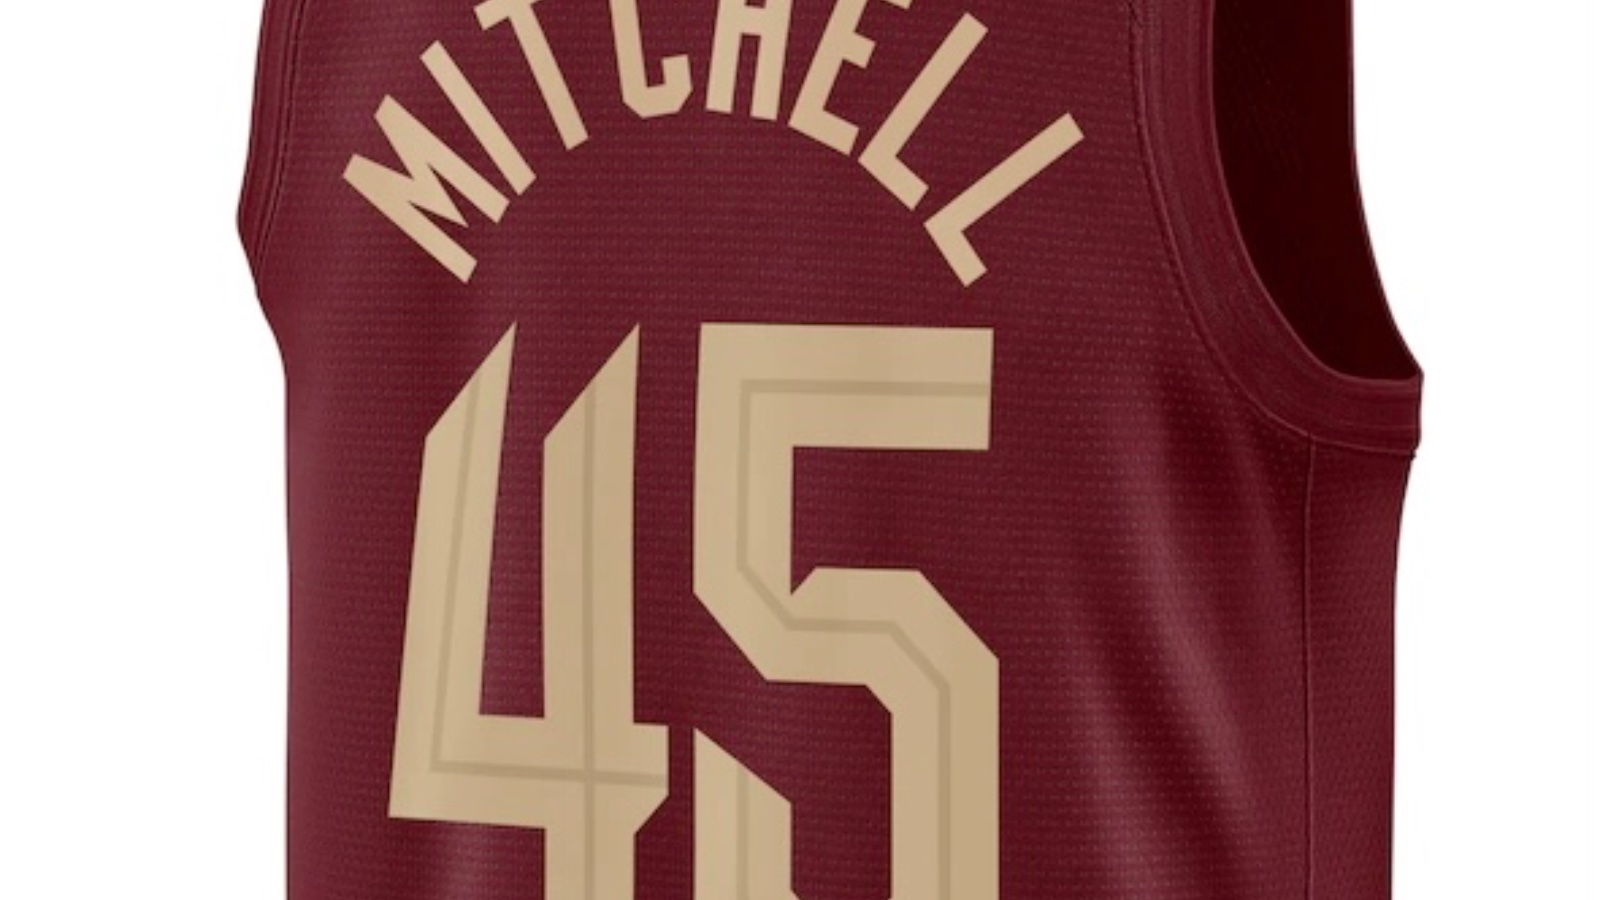 8 Players Could Be Forced to Wear a Different Jersey Number in NBA